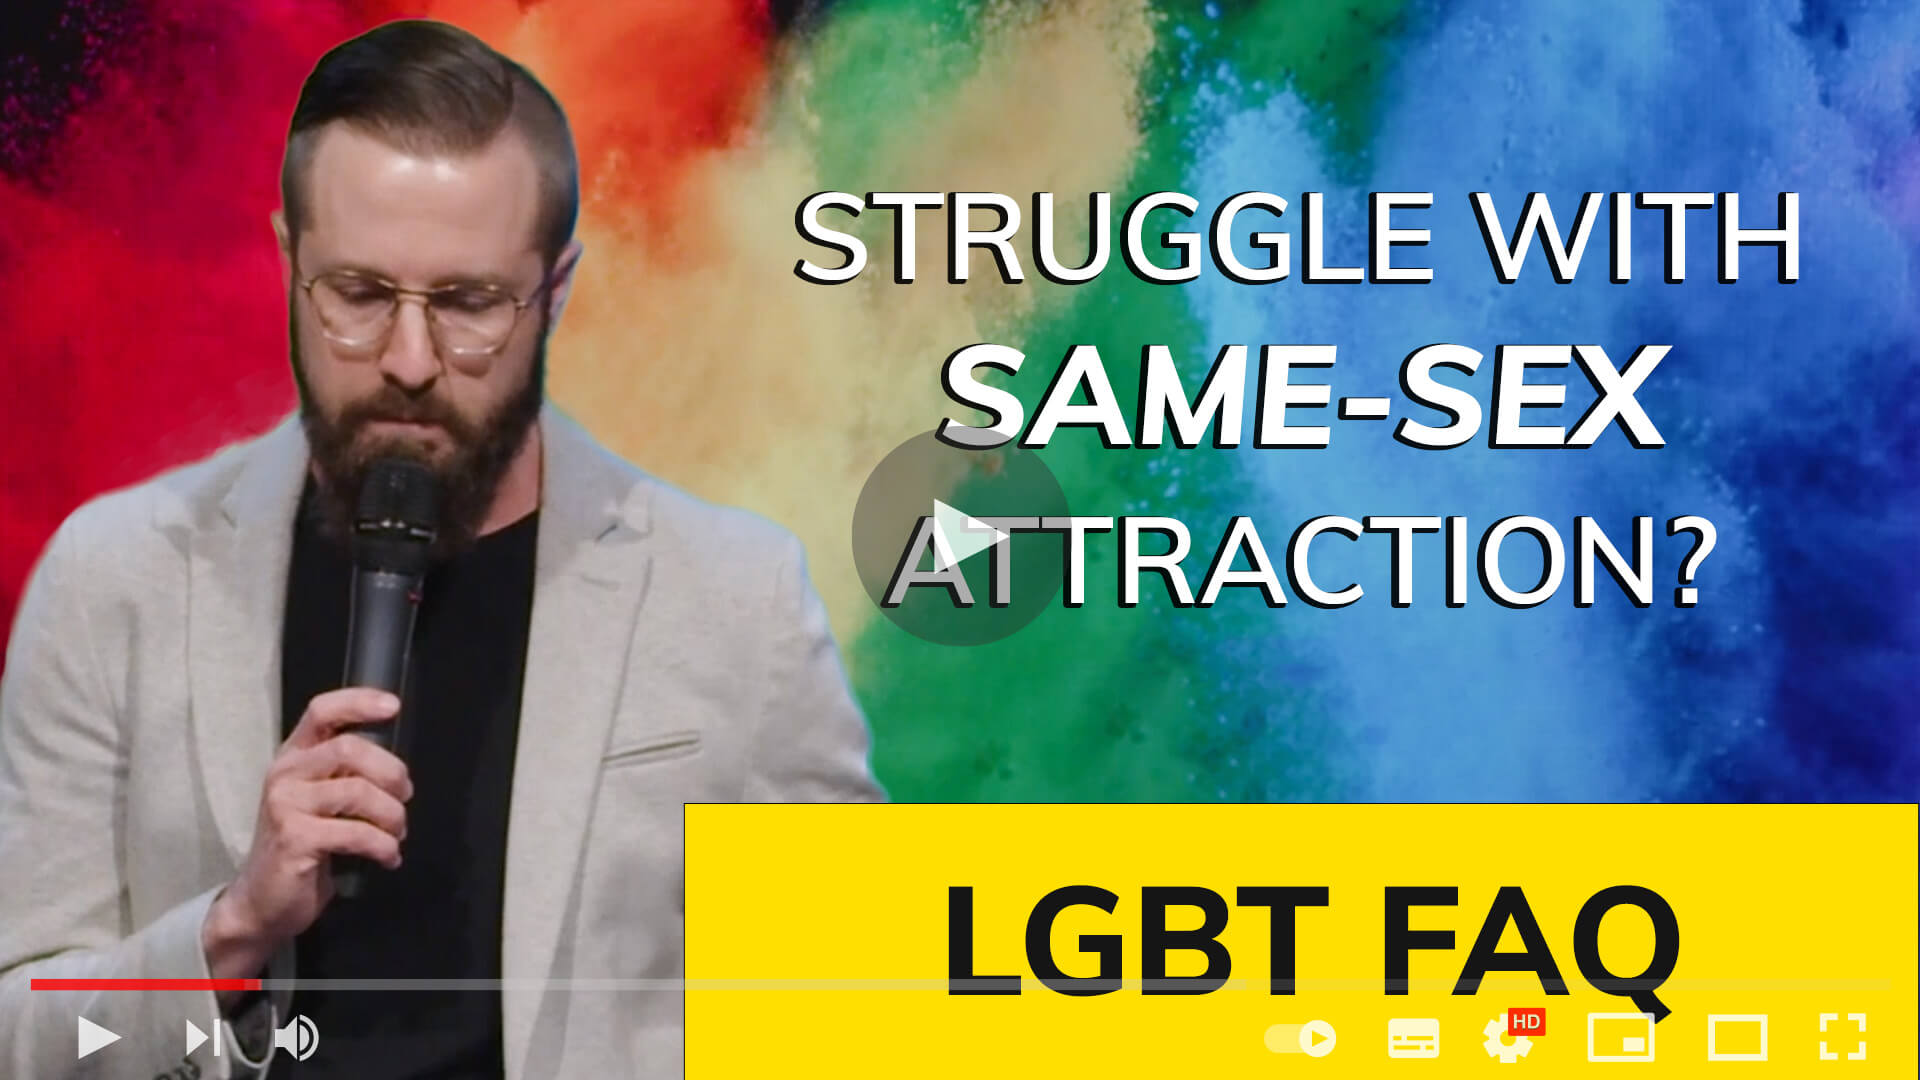 Struggle with same-sex attraction?